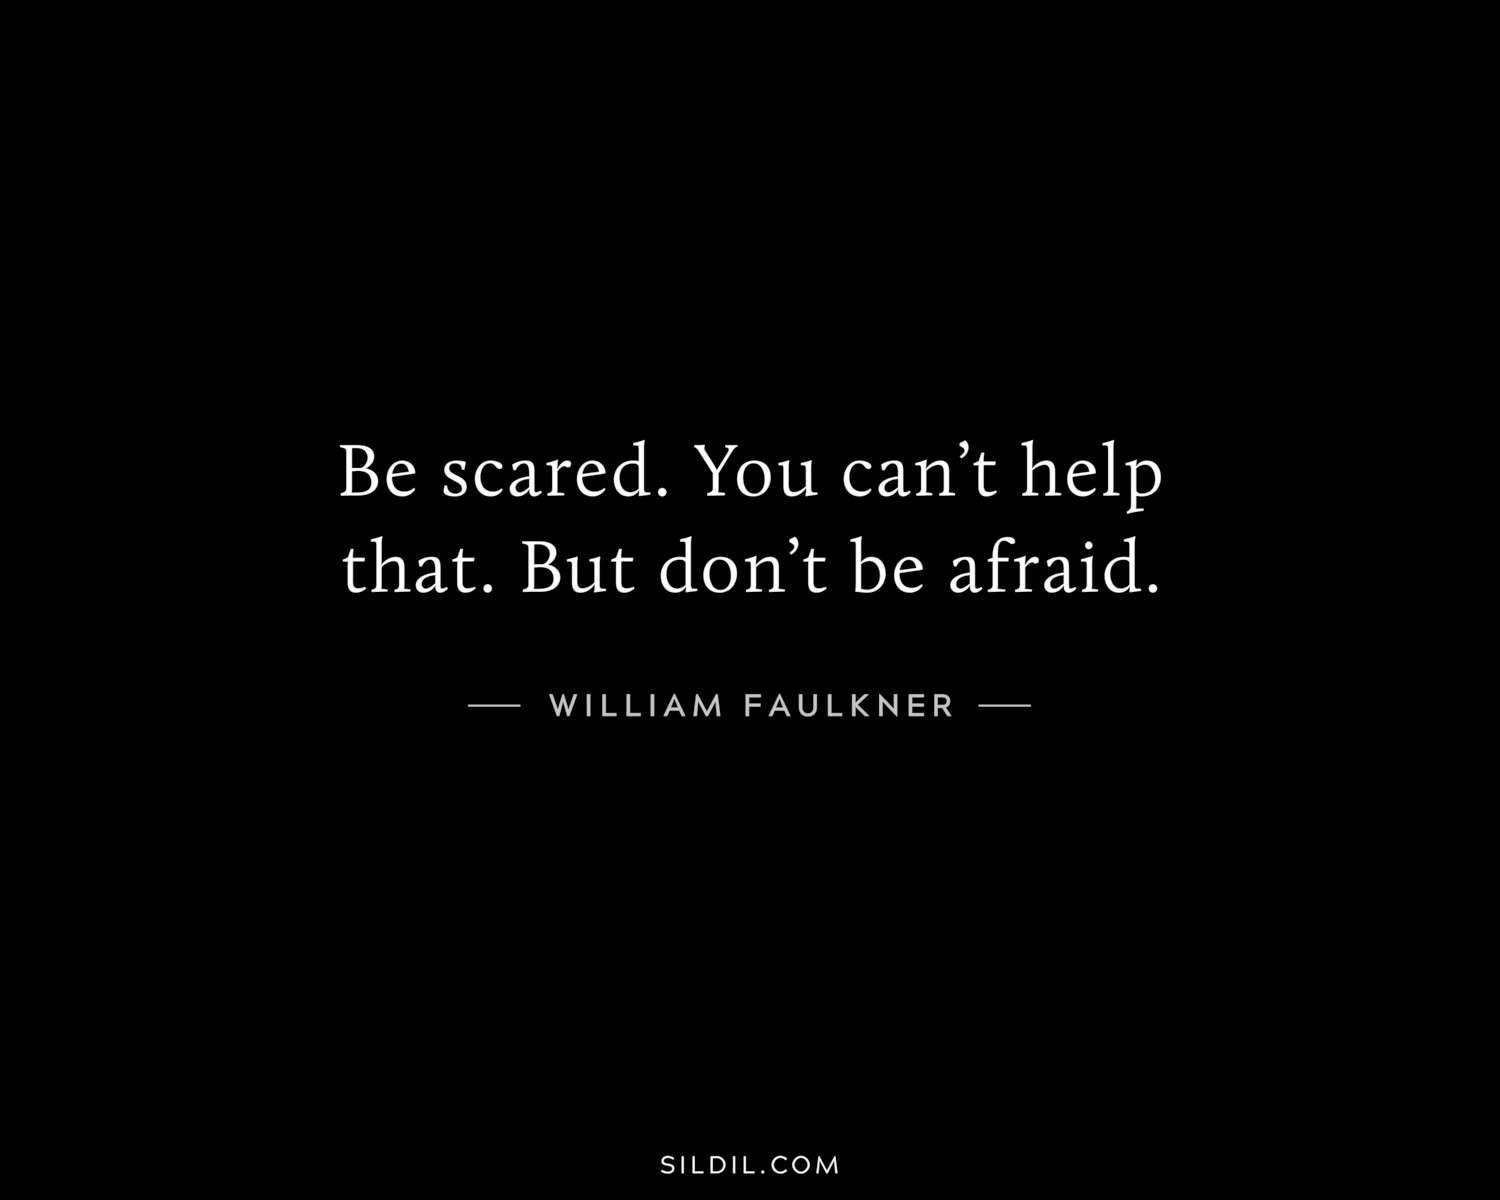 Be scared. You can’t help that. But don’t be afraid.